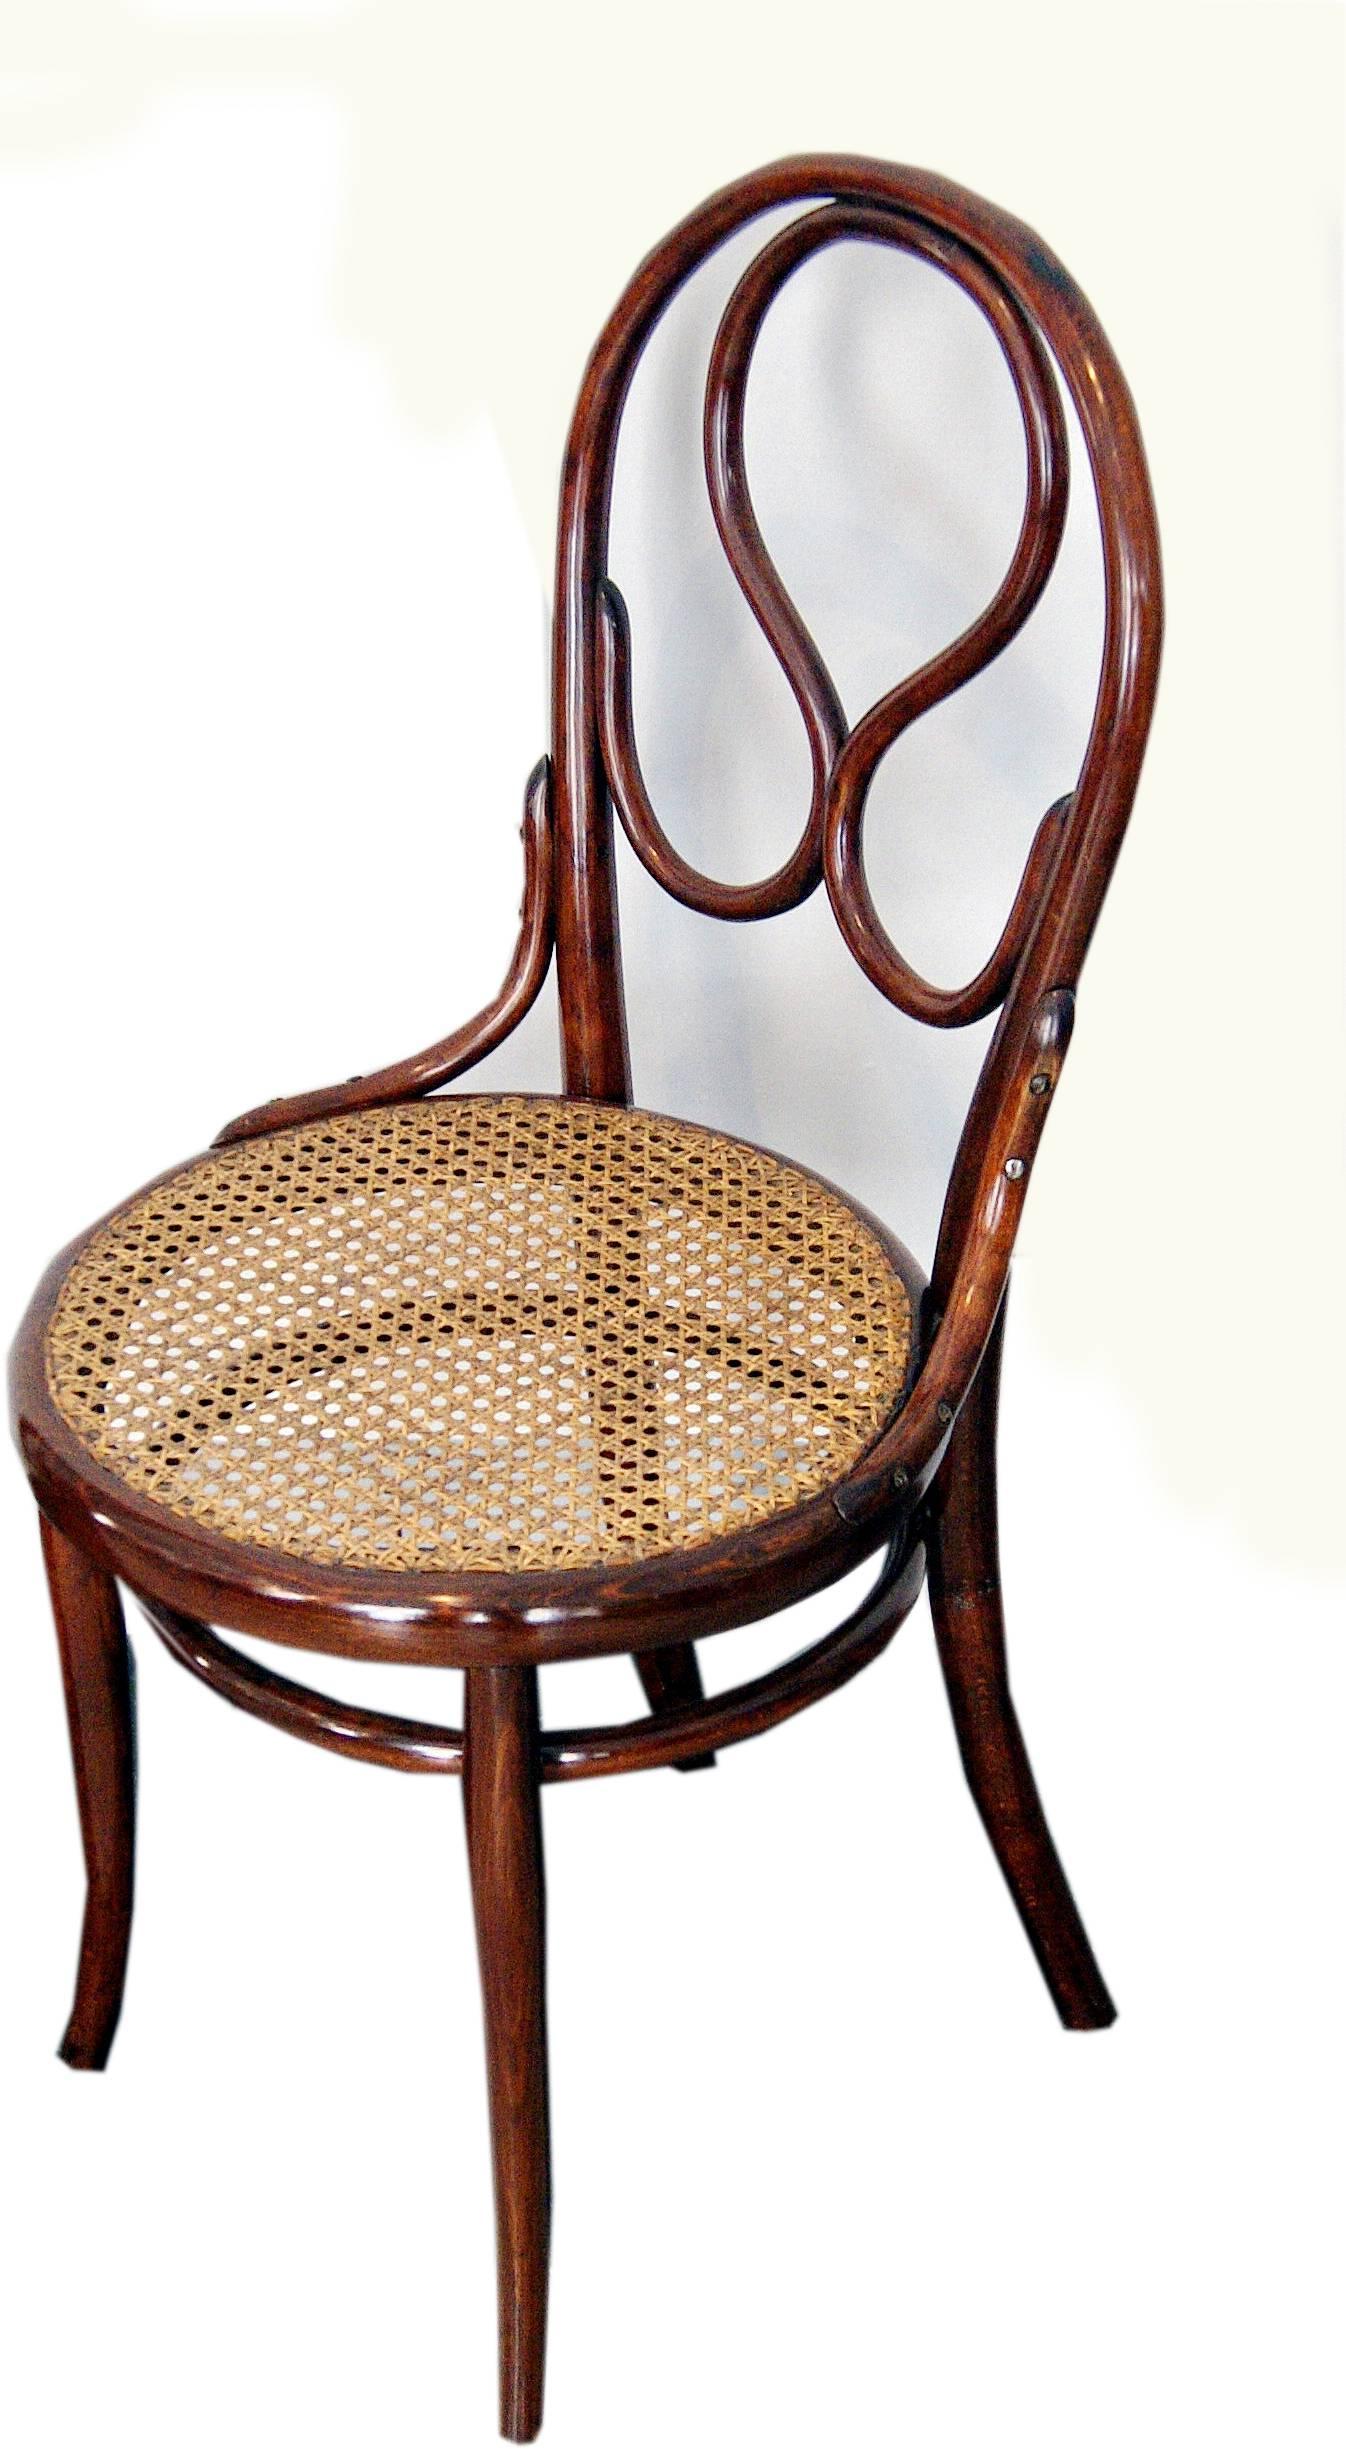 Thonet Vienna most elegant chair

Model number 20
This model was created around the year 1870 and had gone into production as from year 1871. The comfort of backrest was improved shortly before year 1878 so that backrest's construction became